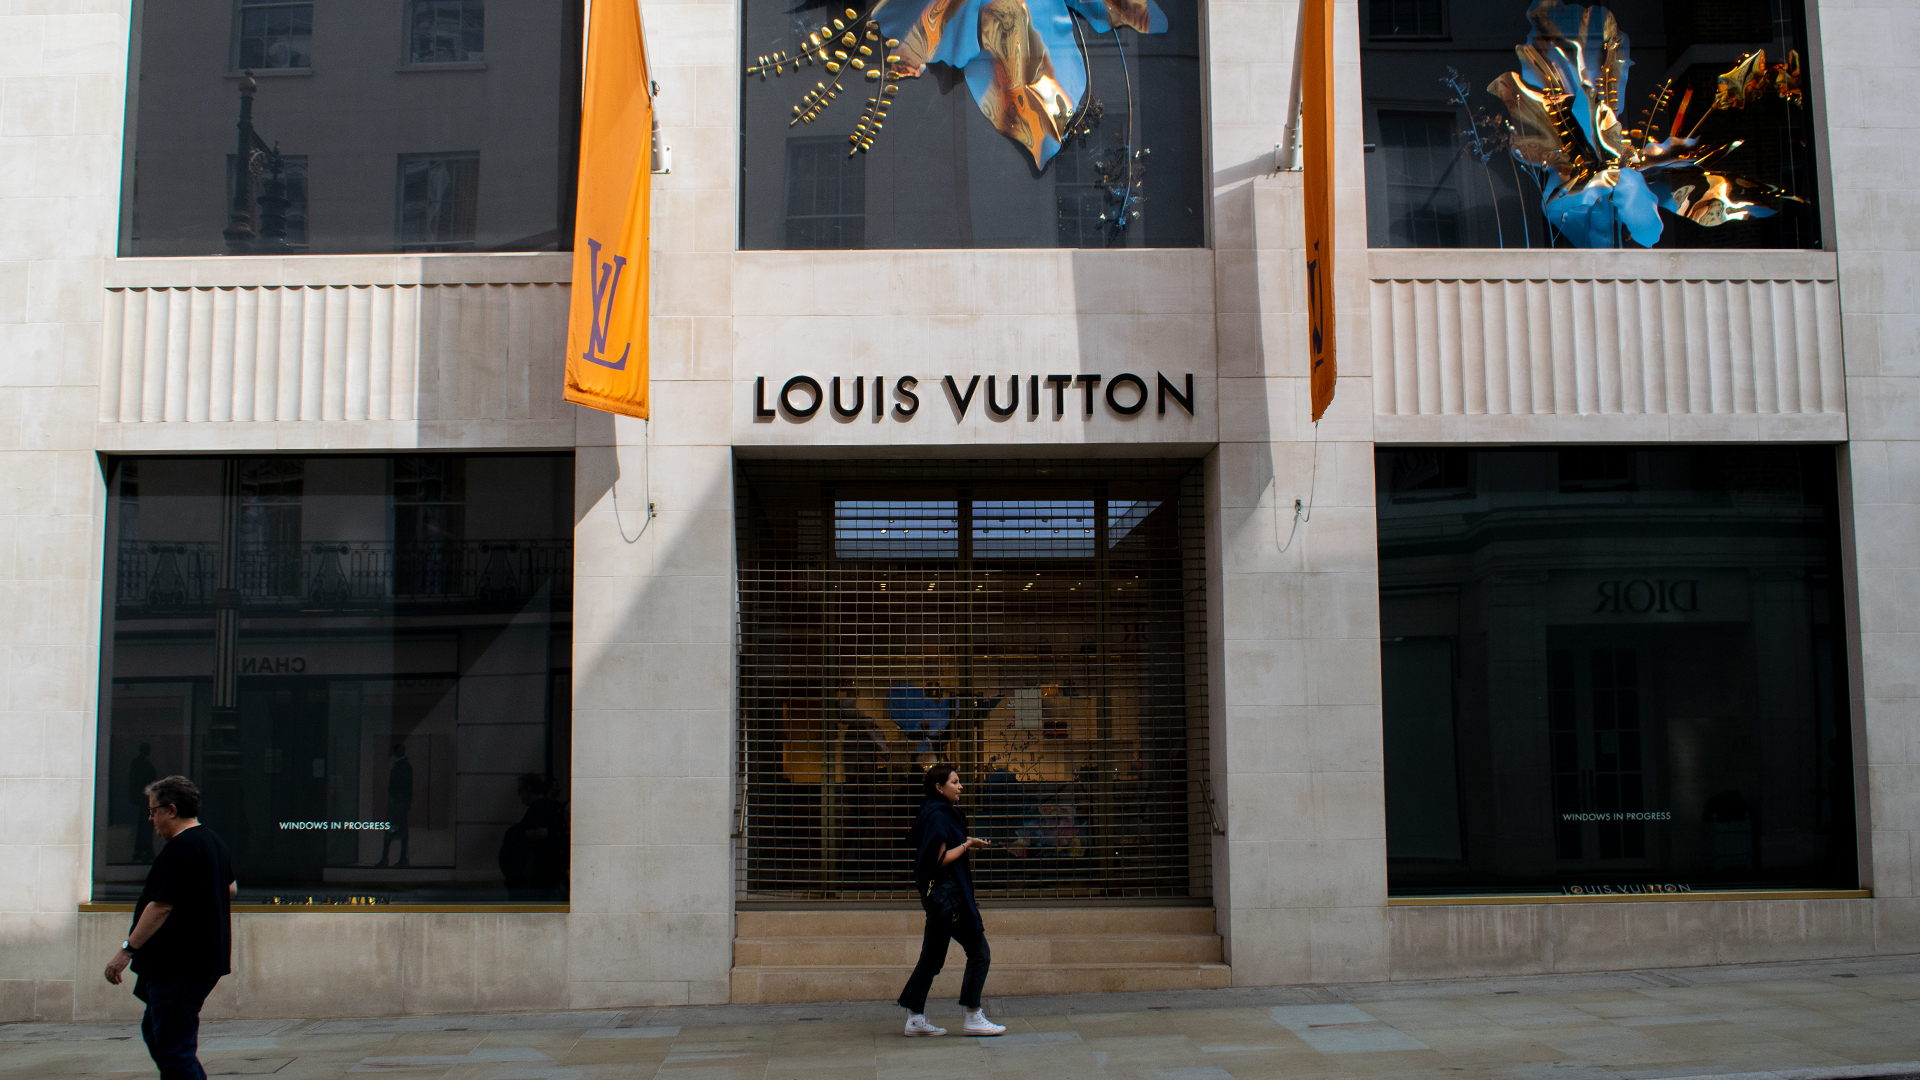 Louis Vuitton closes and lowers window display